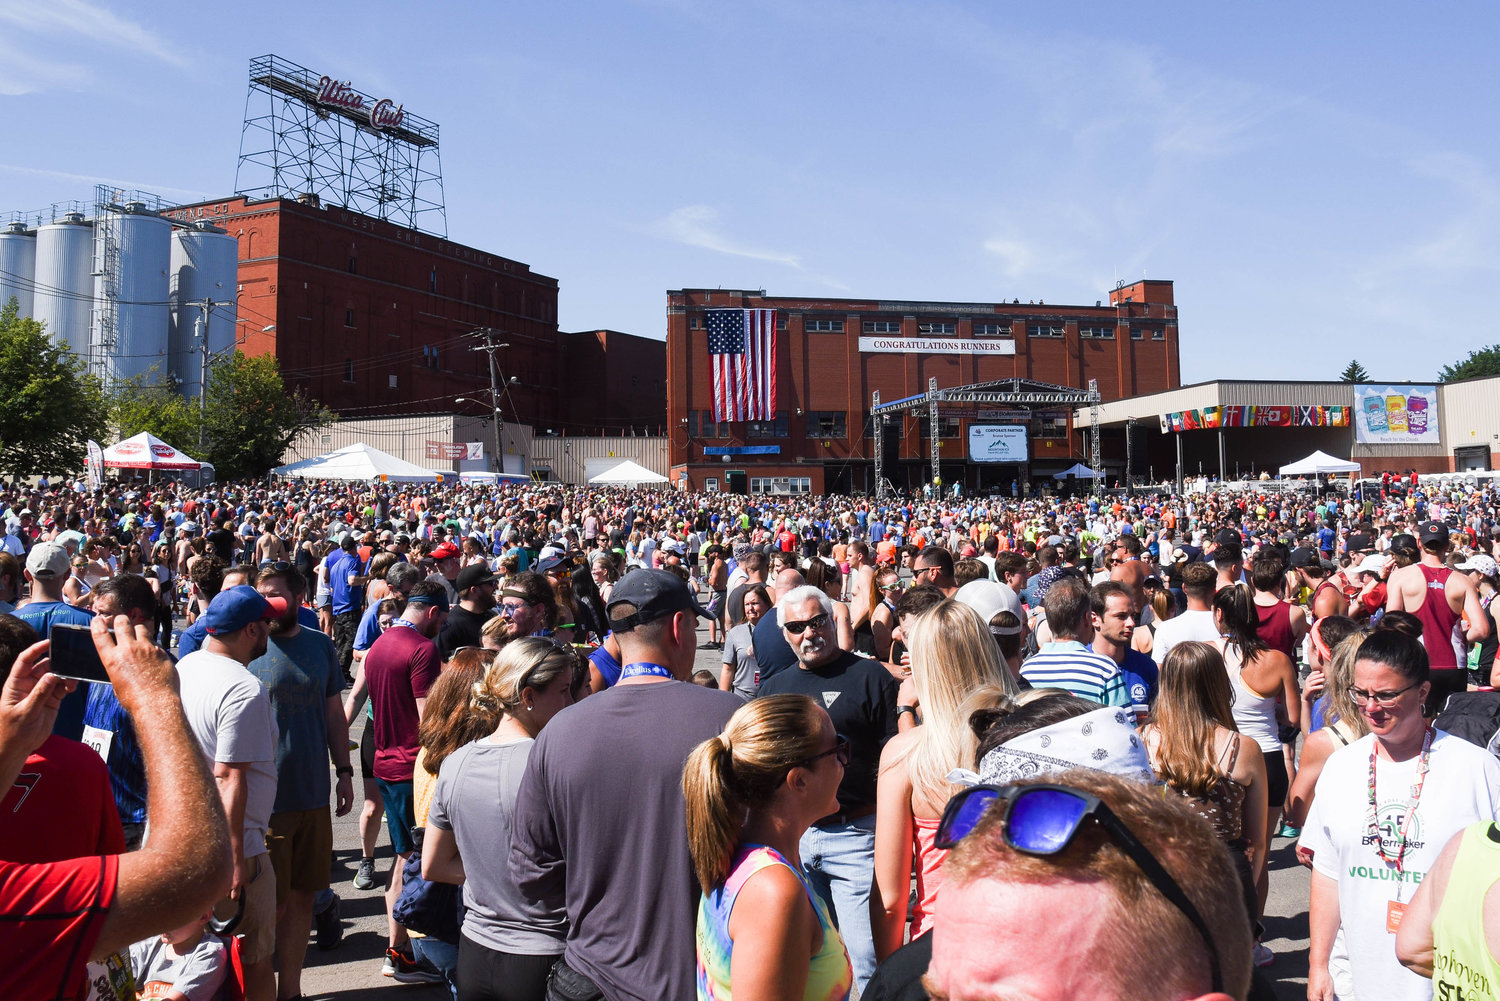 Runners and spectators enjoy the Saranac Post Race Party in the brewery courtyard following the 45th Boilermaker Road Race on Sunday.